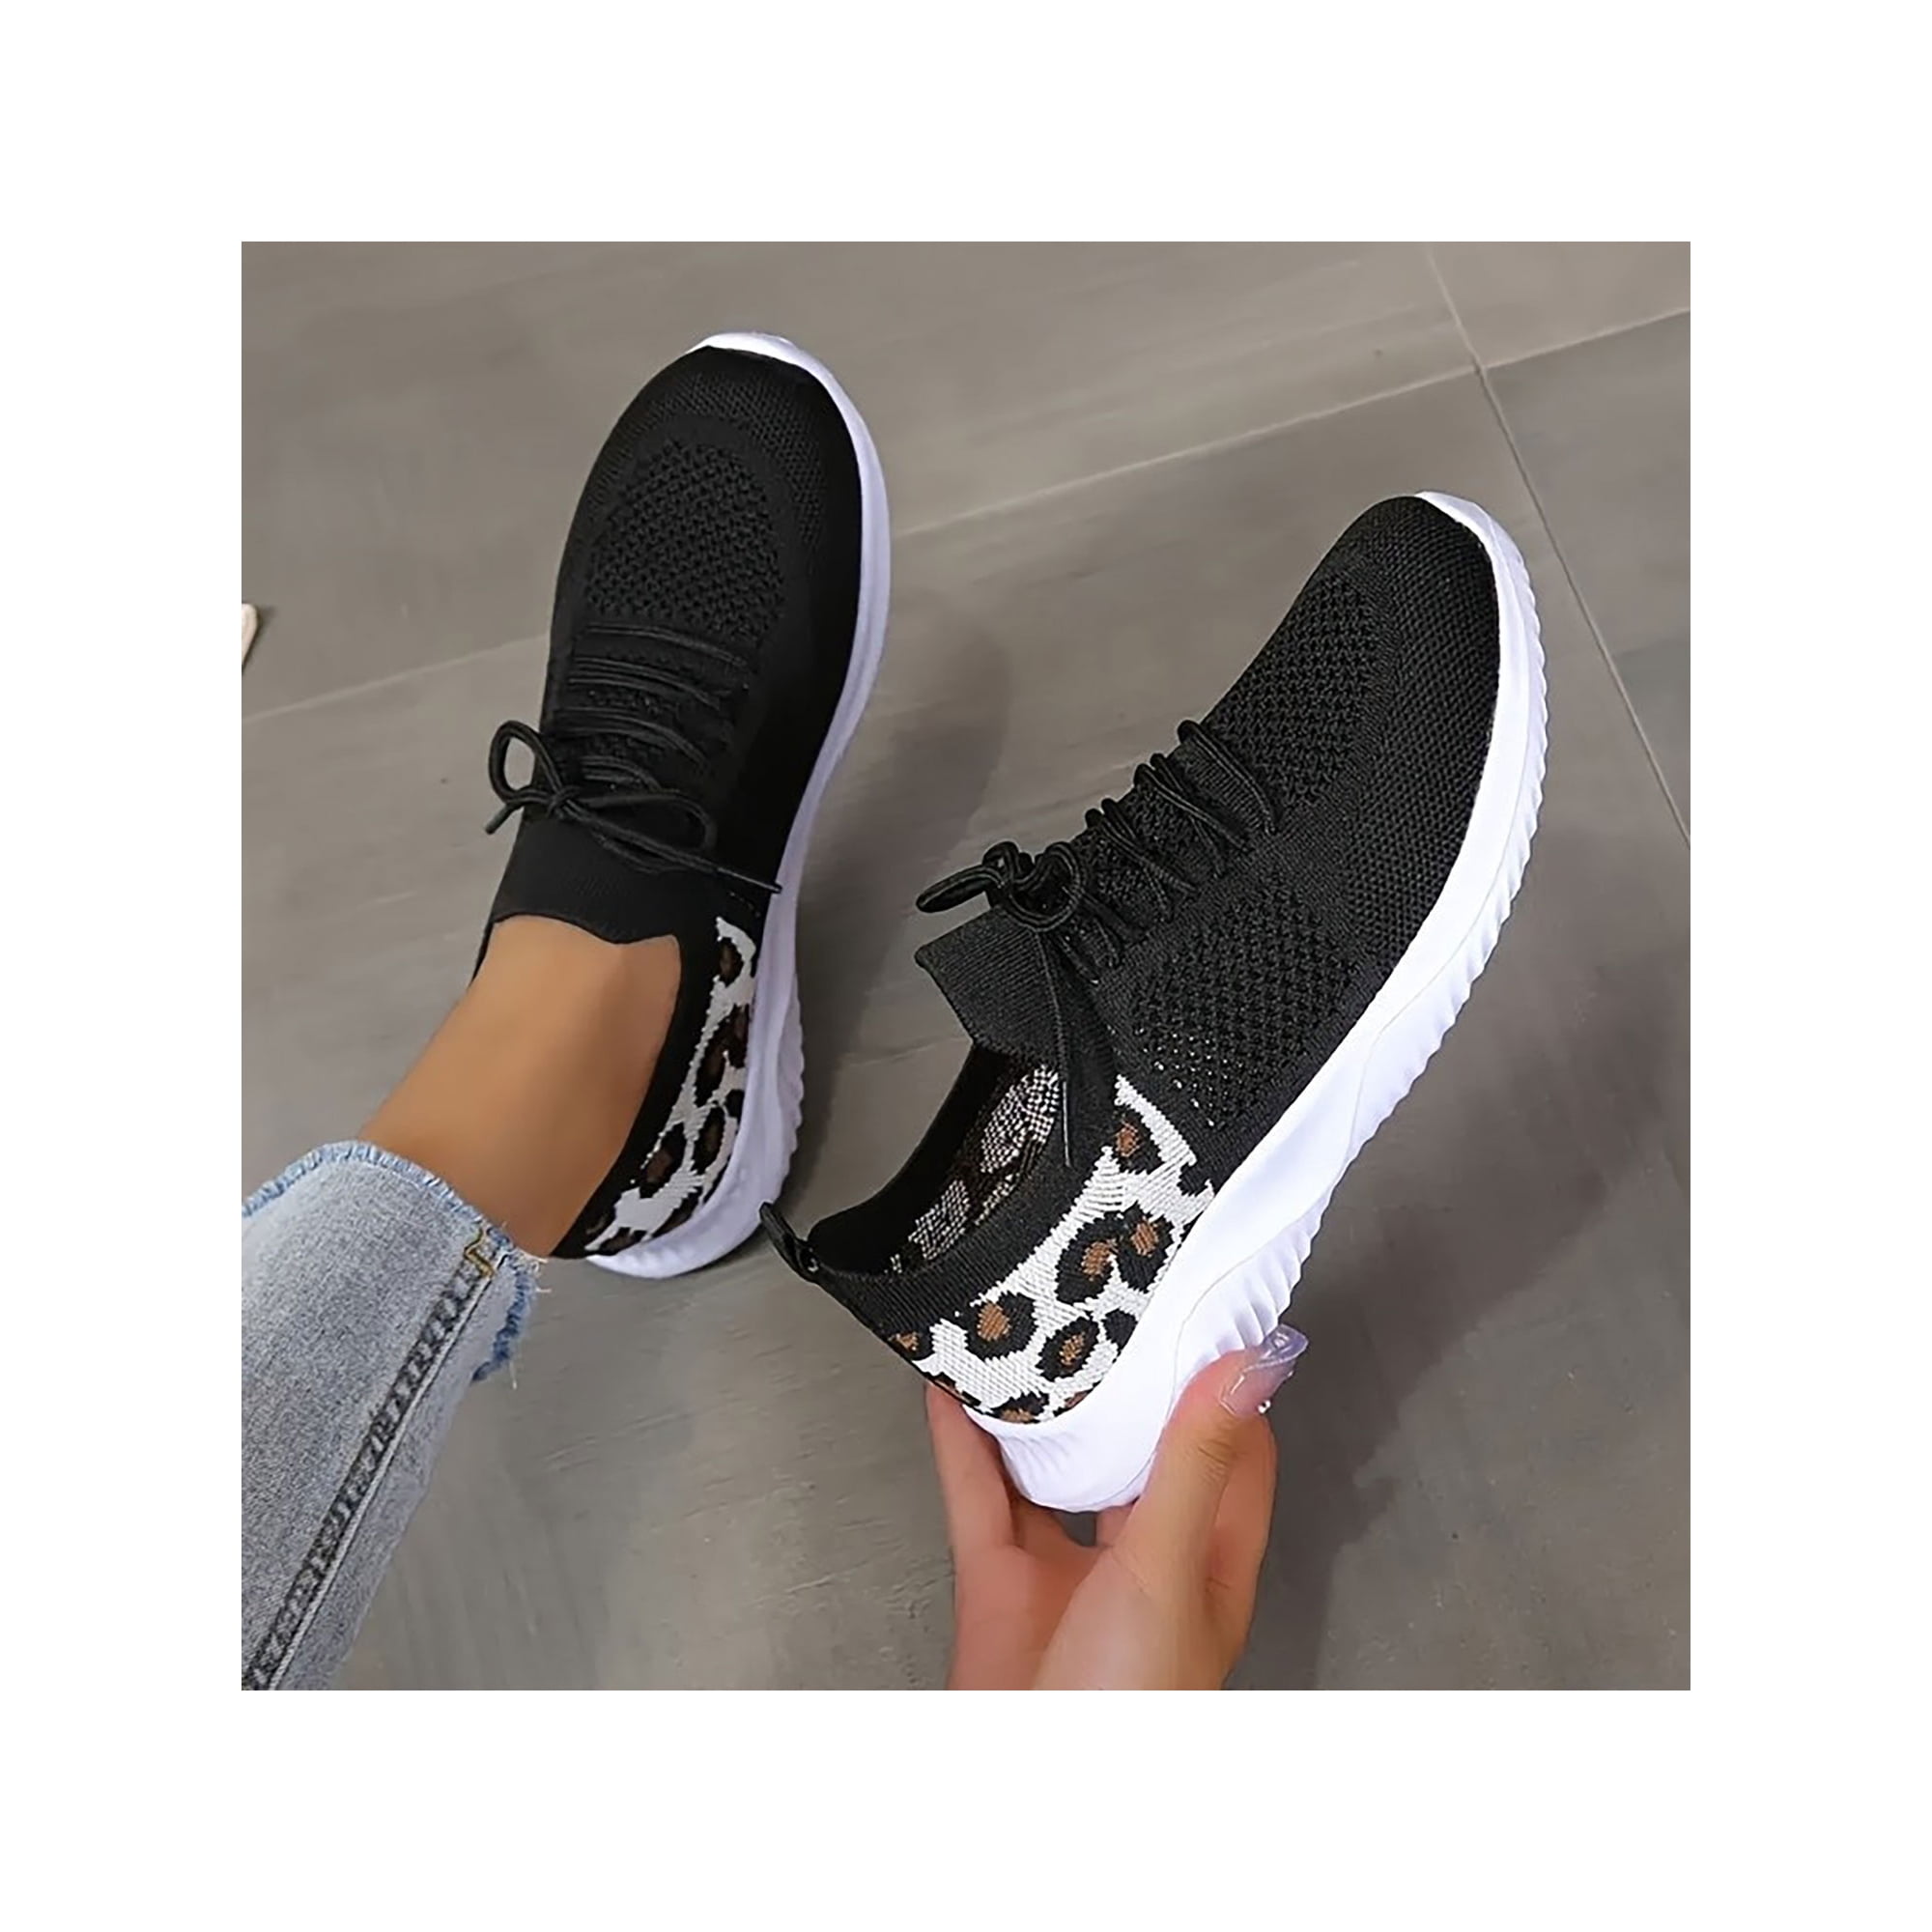 Sanviglor Women Athletic Shoes Leopard Print Sneakers Lace Running Shoe Fitness Fashion Breathable Flats Lightweight Mesh Trainers Black -